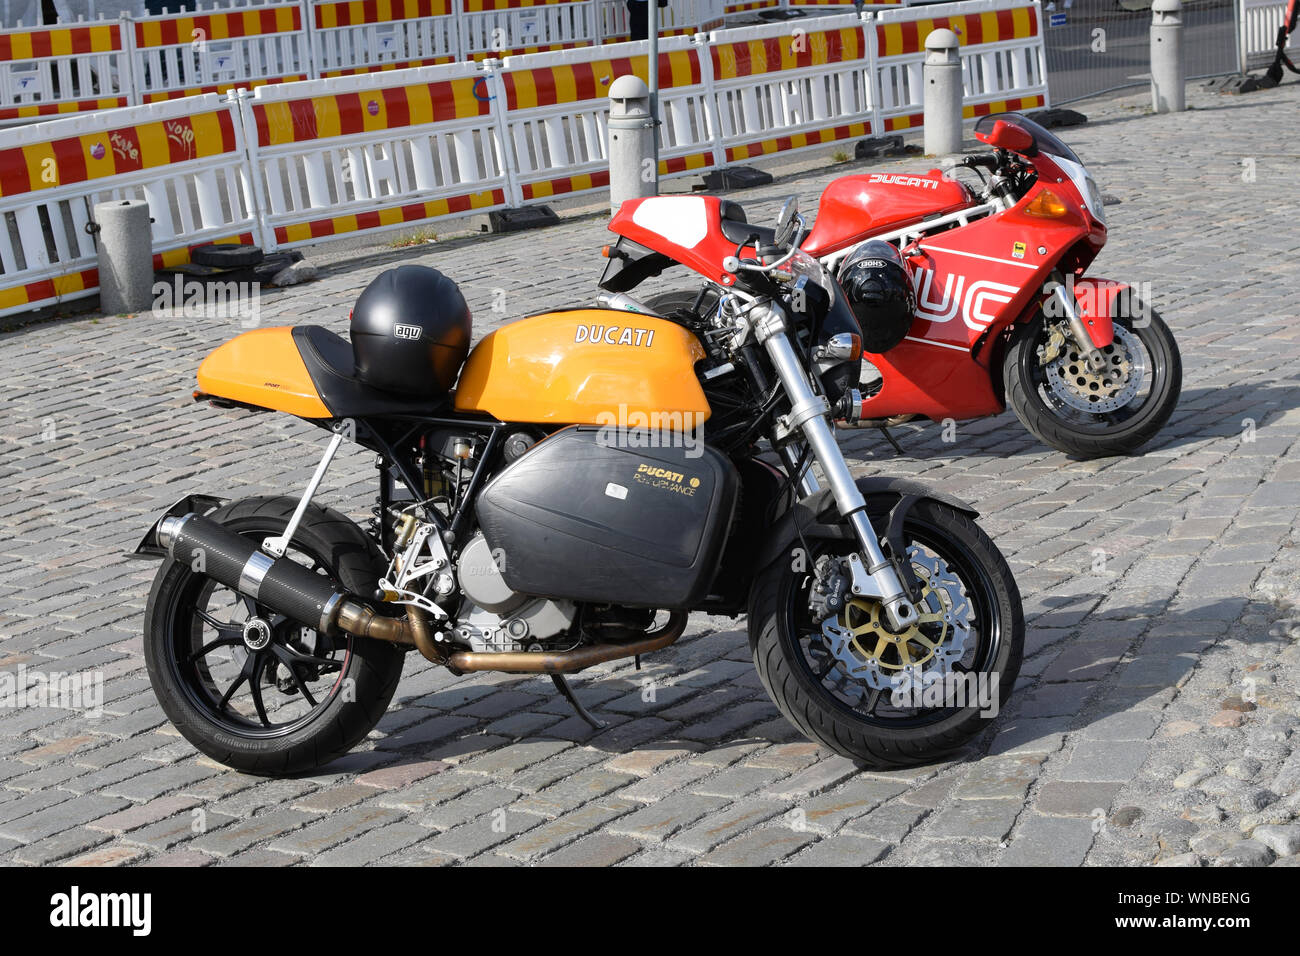 Tampere, Finland - August 31, 2019: Yellow and red Ducati motorcycles Stock Photo